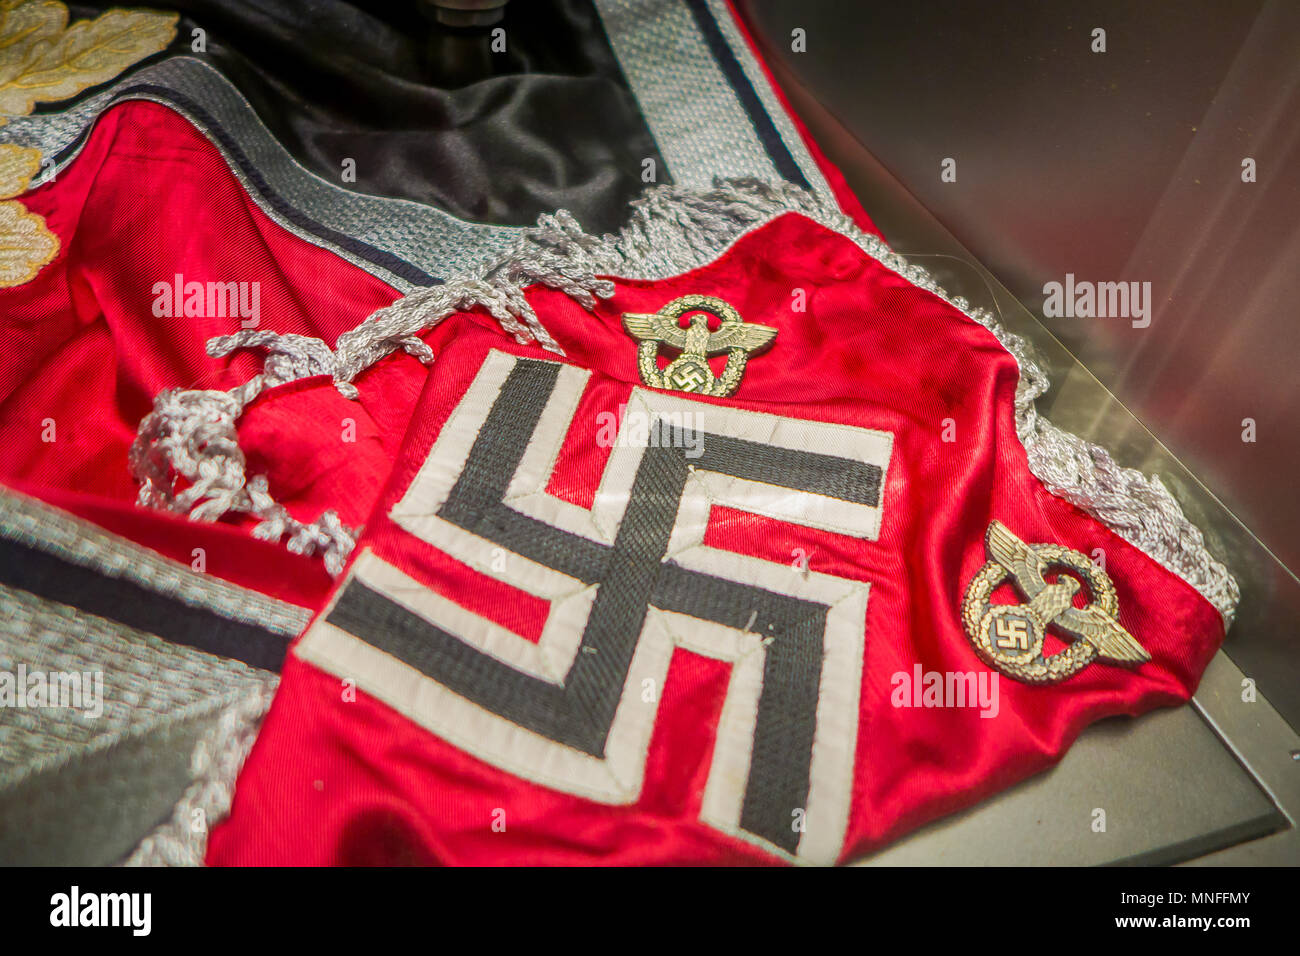 BELARUS, MINSK - MAY 01, 2018: Close up of Hakenkreuz swastika nazi sign over a red brand inside of State Museum of the Great Patriotic War of the museum in Minsk Stock Photo